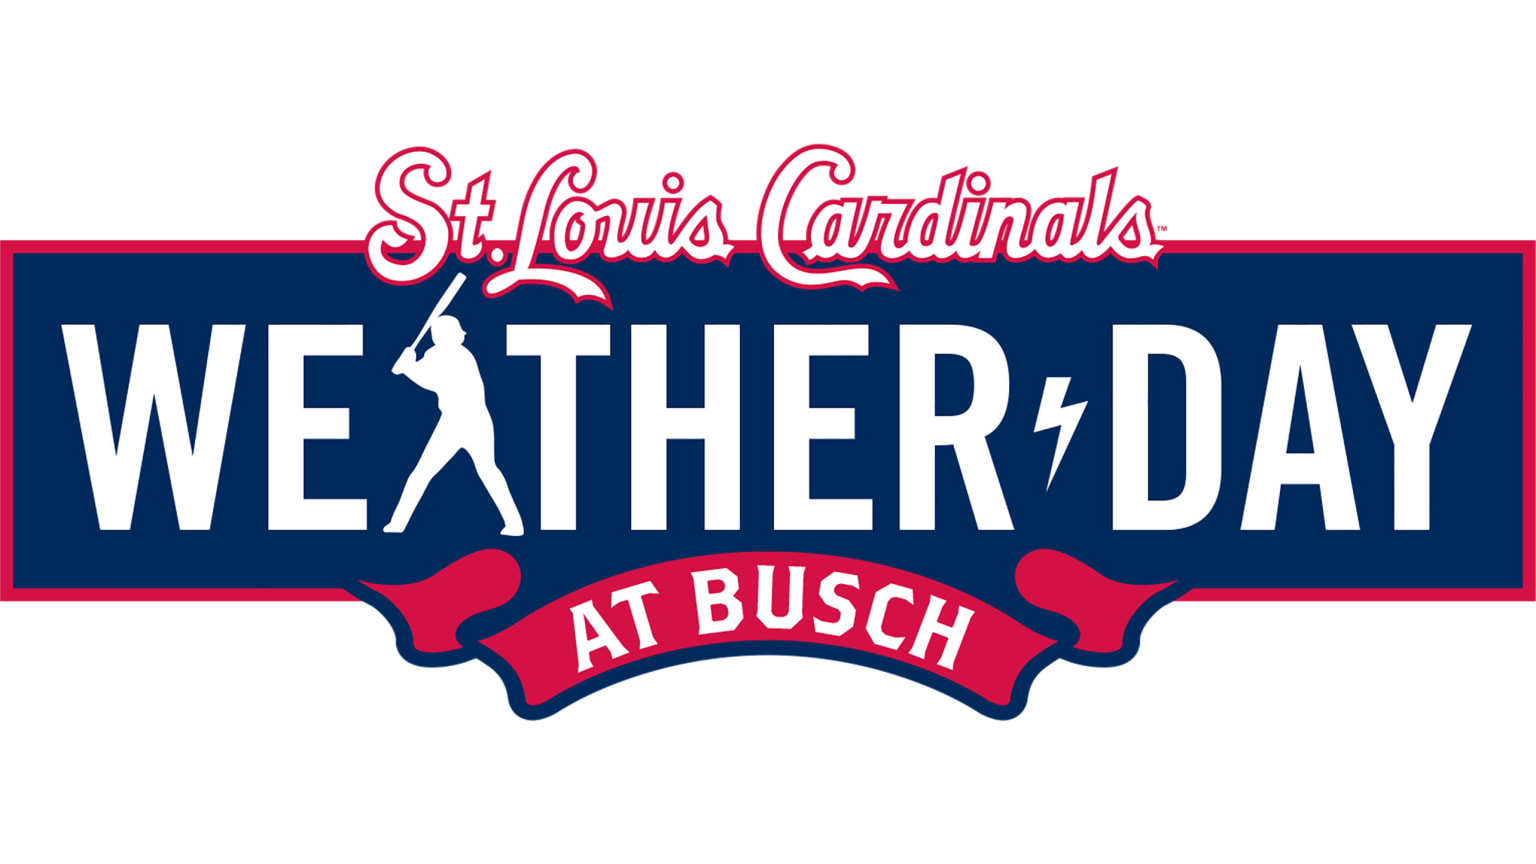 Margaritaville - Get your tickets today for Margaritaville Night with the  St. Louis Cardinals on June 29. Details and tickets available here:  bit.ly/MVCardinals